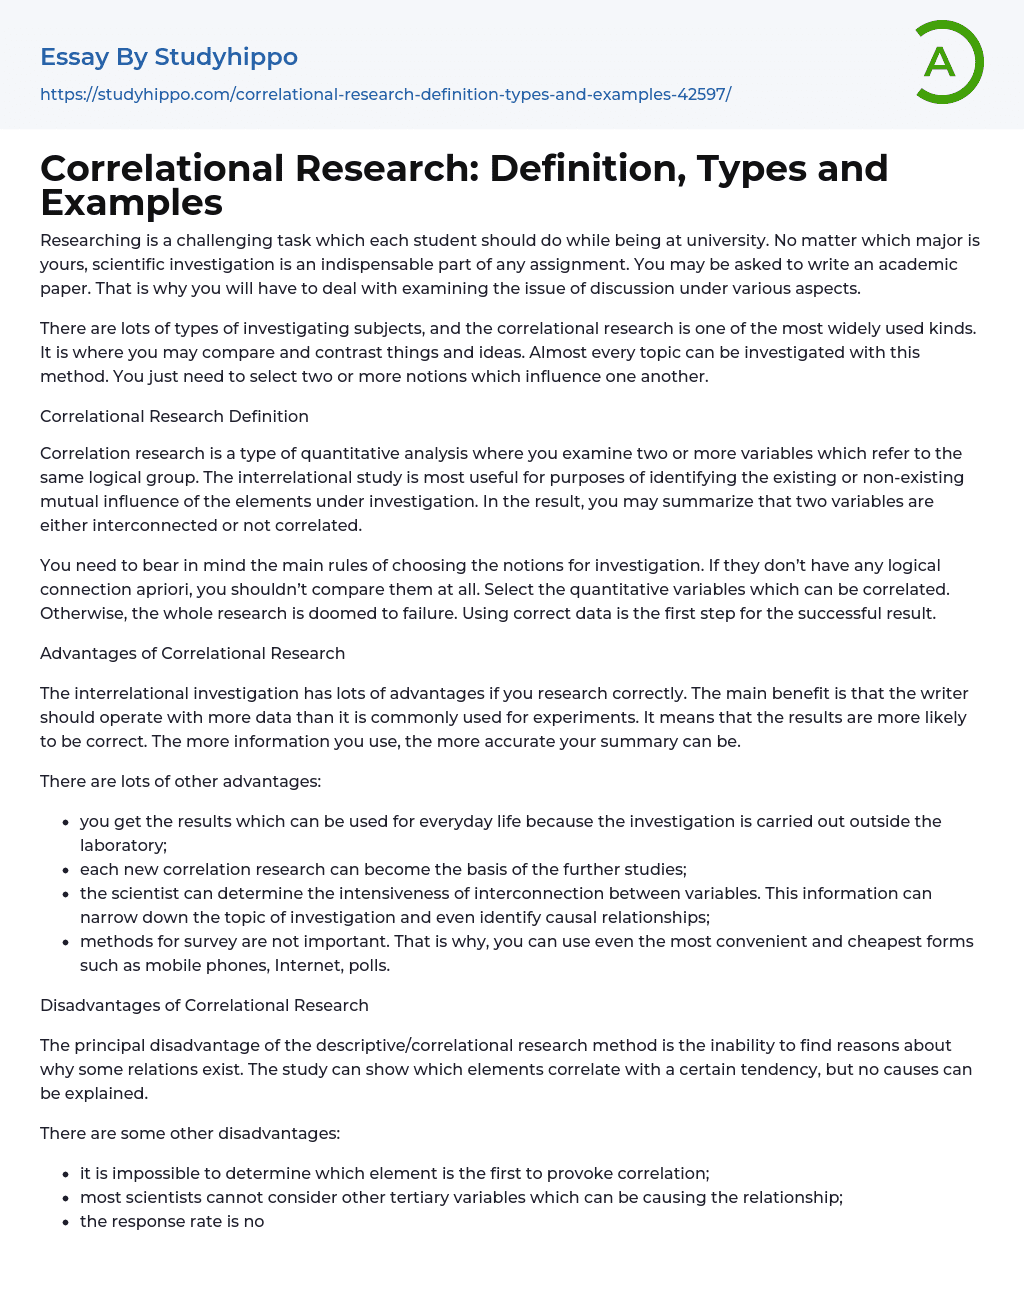 Correlational Research: Definition, Types and Examples Essay Example